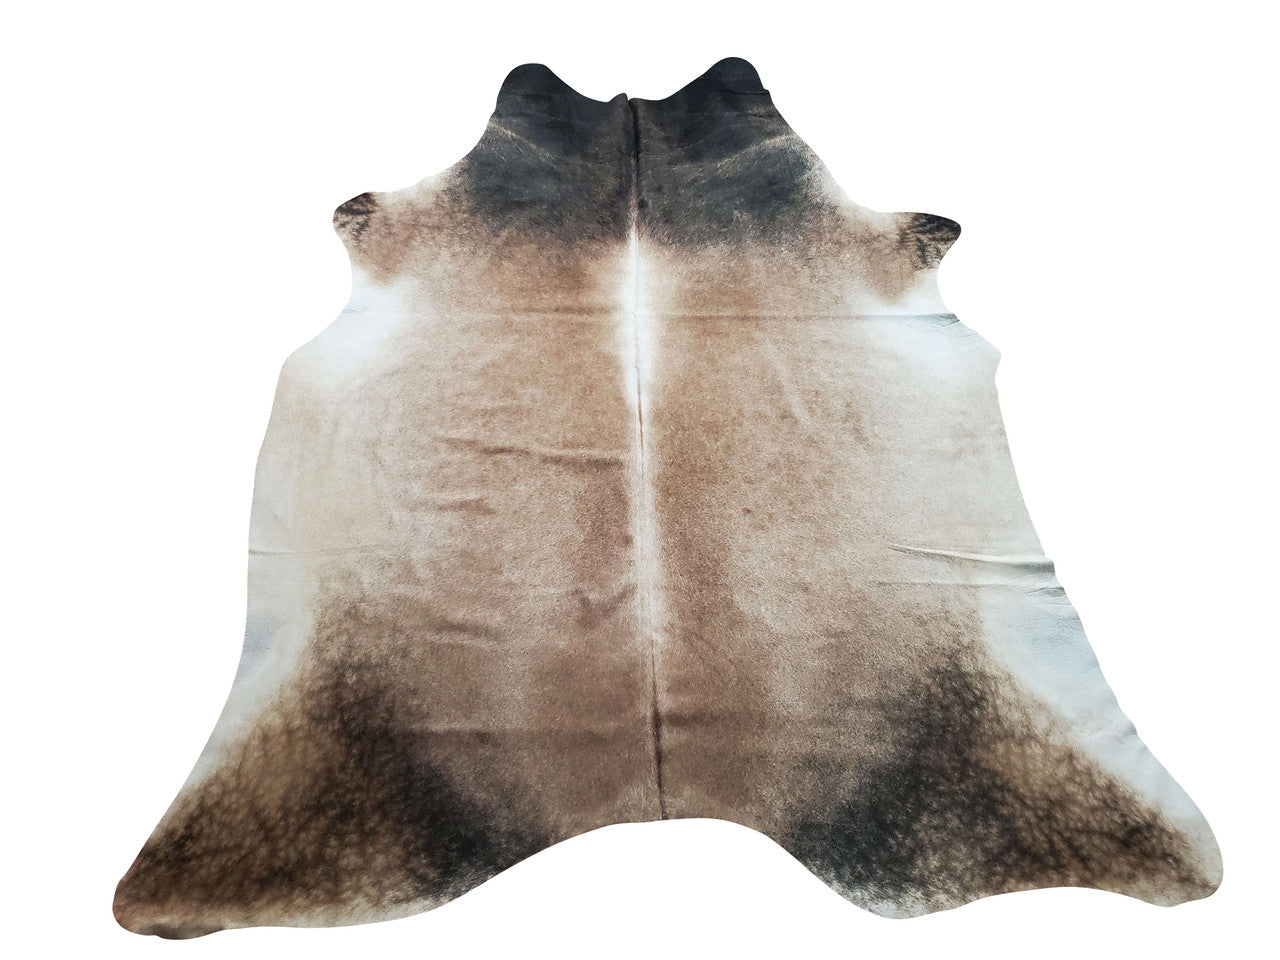 If you are looking for a long time for a cowhide rug and are considering, this is one-of-a-kind and stunning, great quality, and the colors are very pretty.
